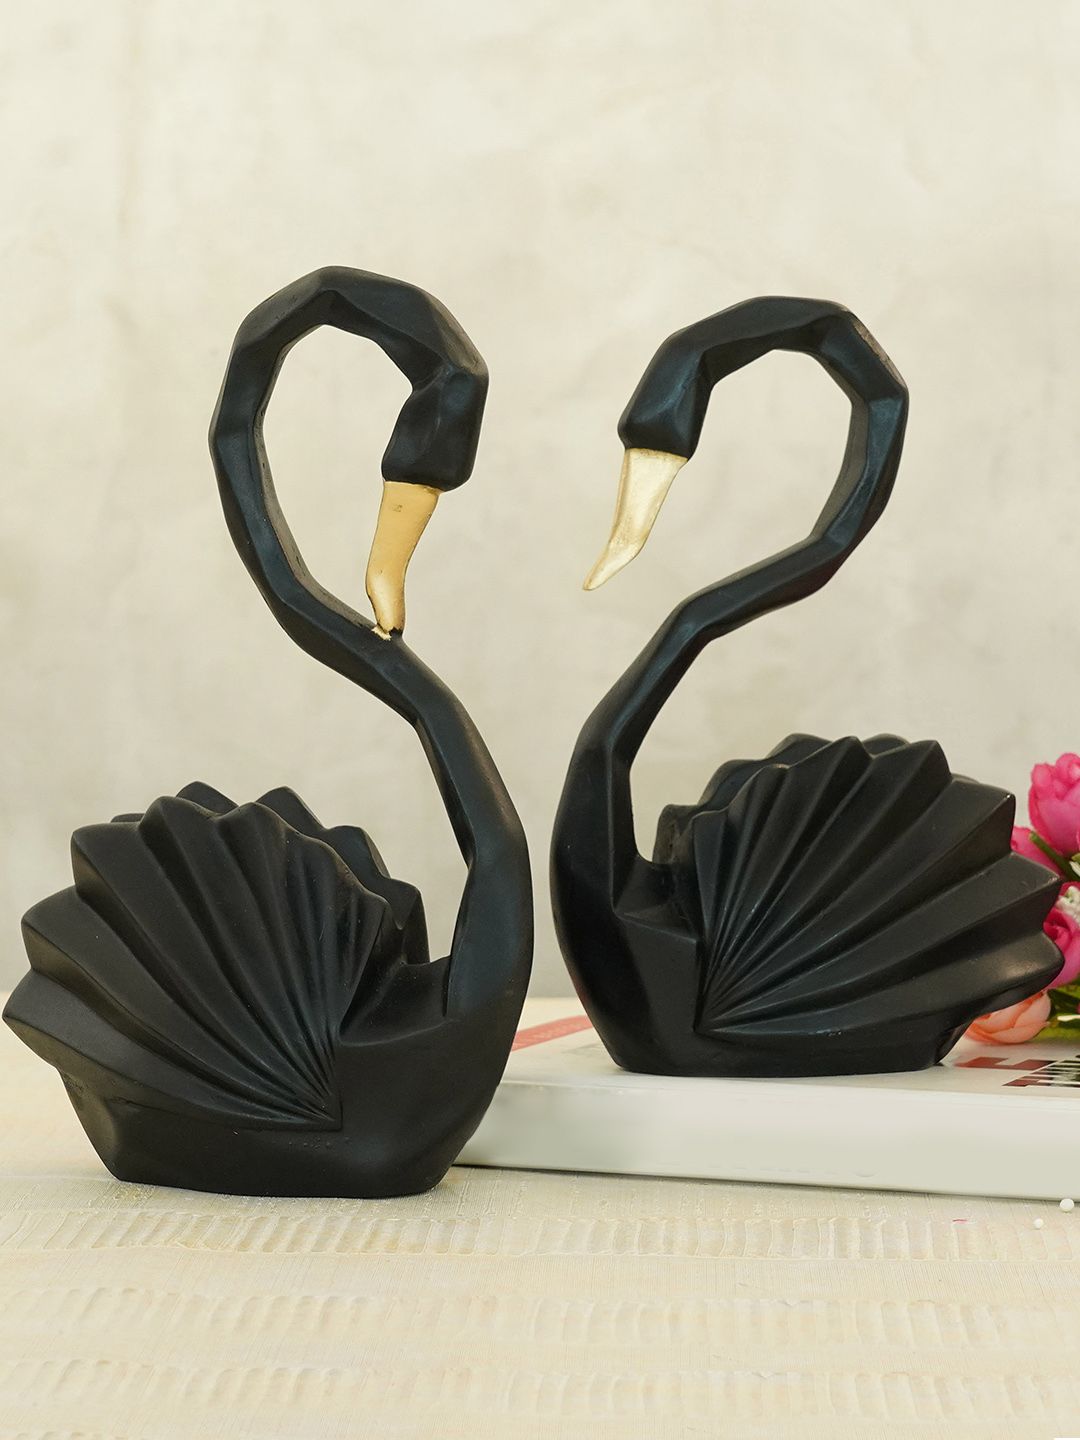 TIED RIBBONS Set of 2 Black Duck Swan Handcrafted Showpiece Price in India